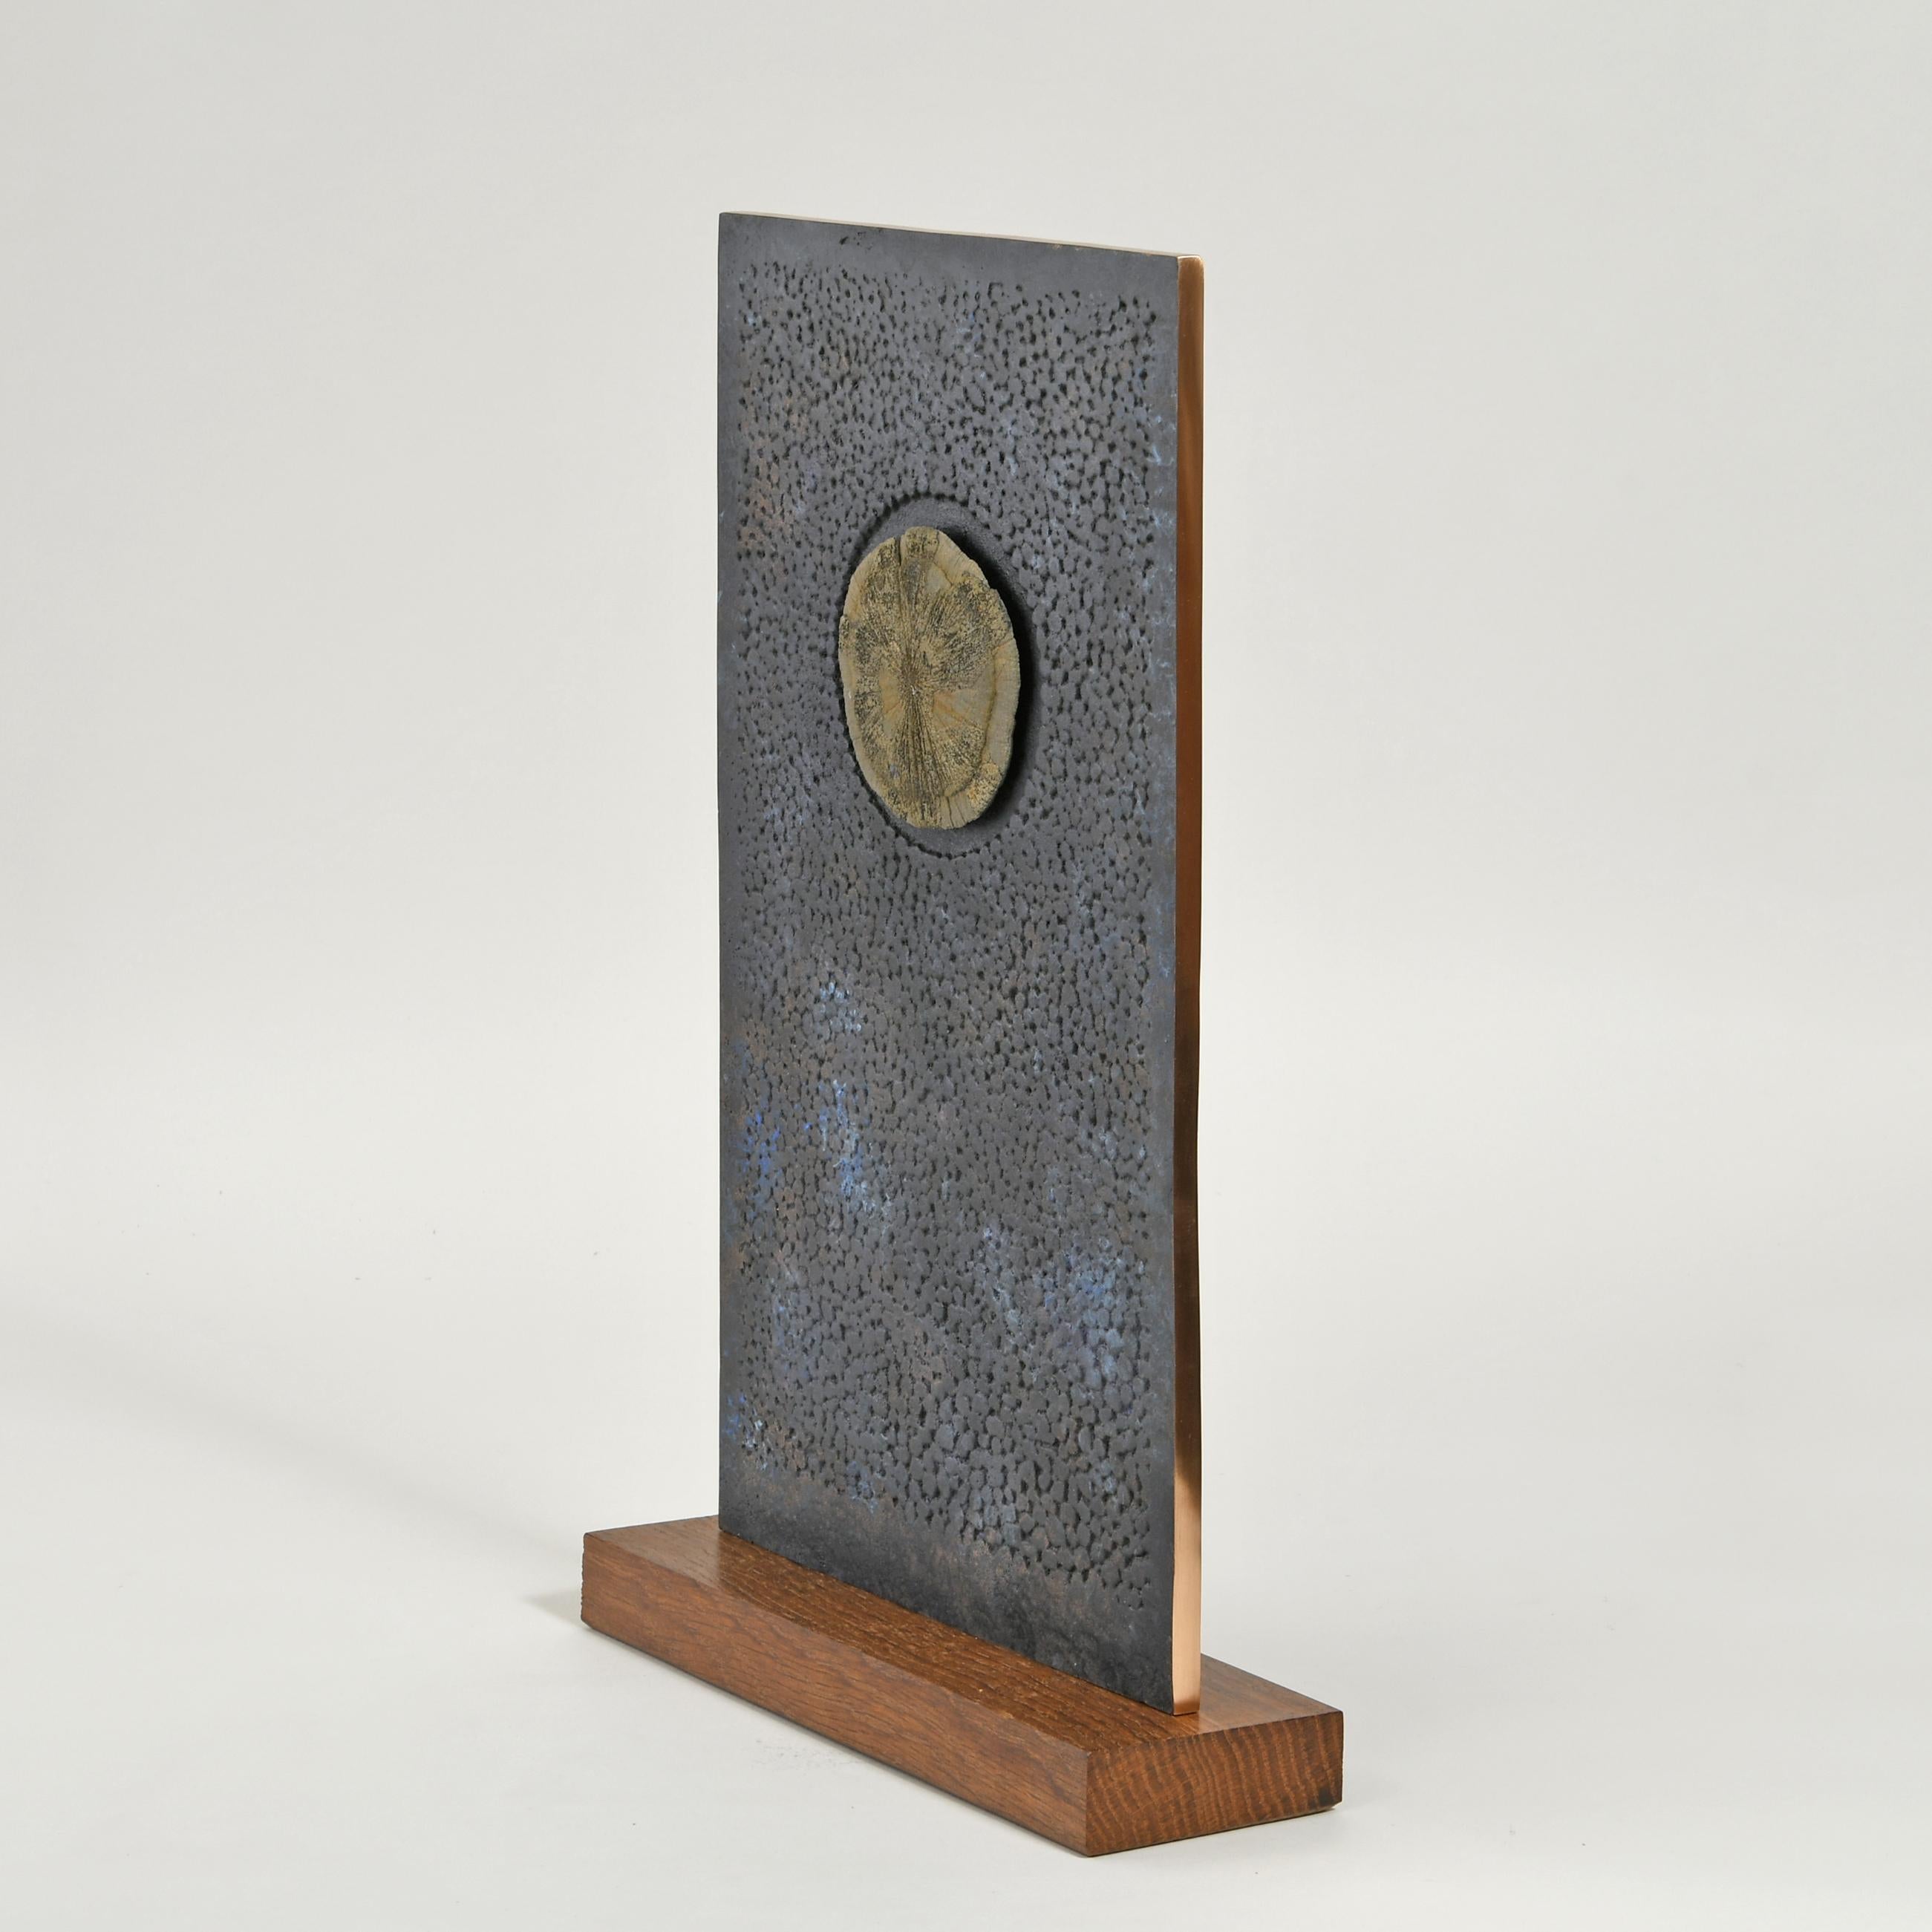 40 high x 23 x 8 cm
Bronze with ferrite inclusion on an oak base
Stamped with monogram signature and uniquely numbered 501C
Series of unique inclusion variations.
The face side with a textured surface has a circular indent incorporating an ancient